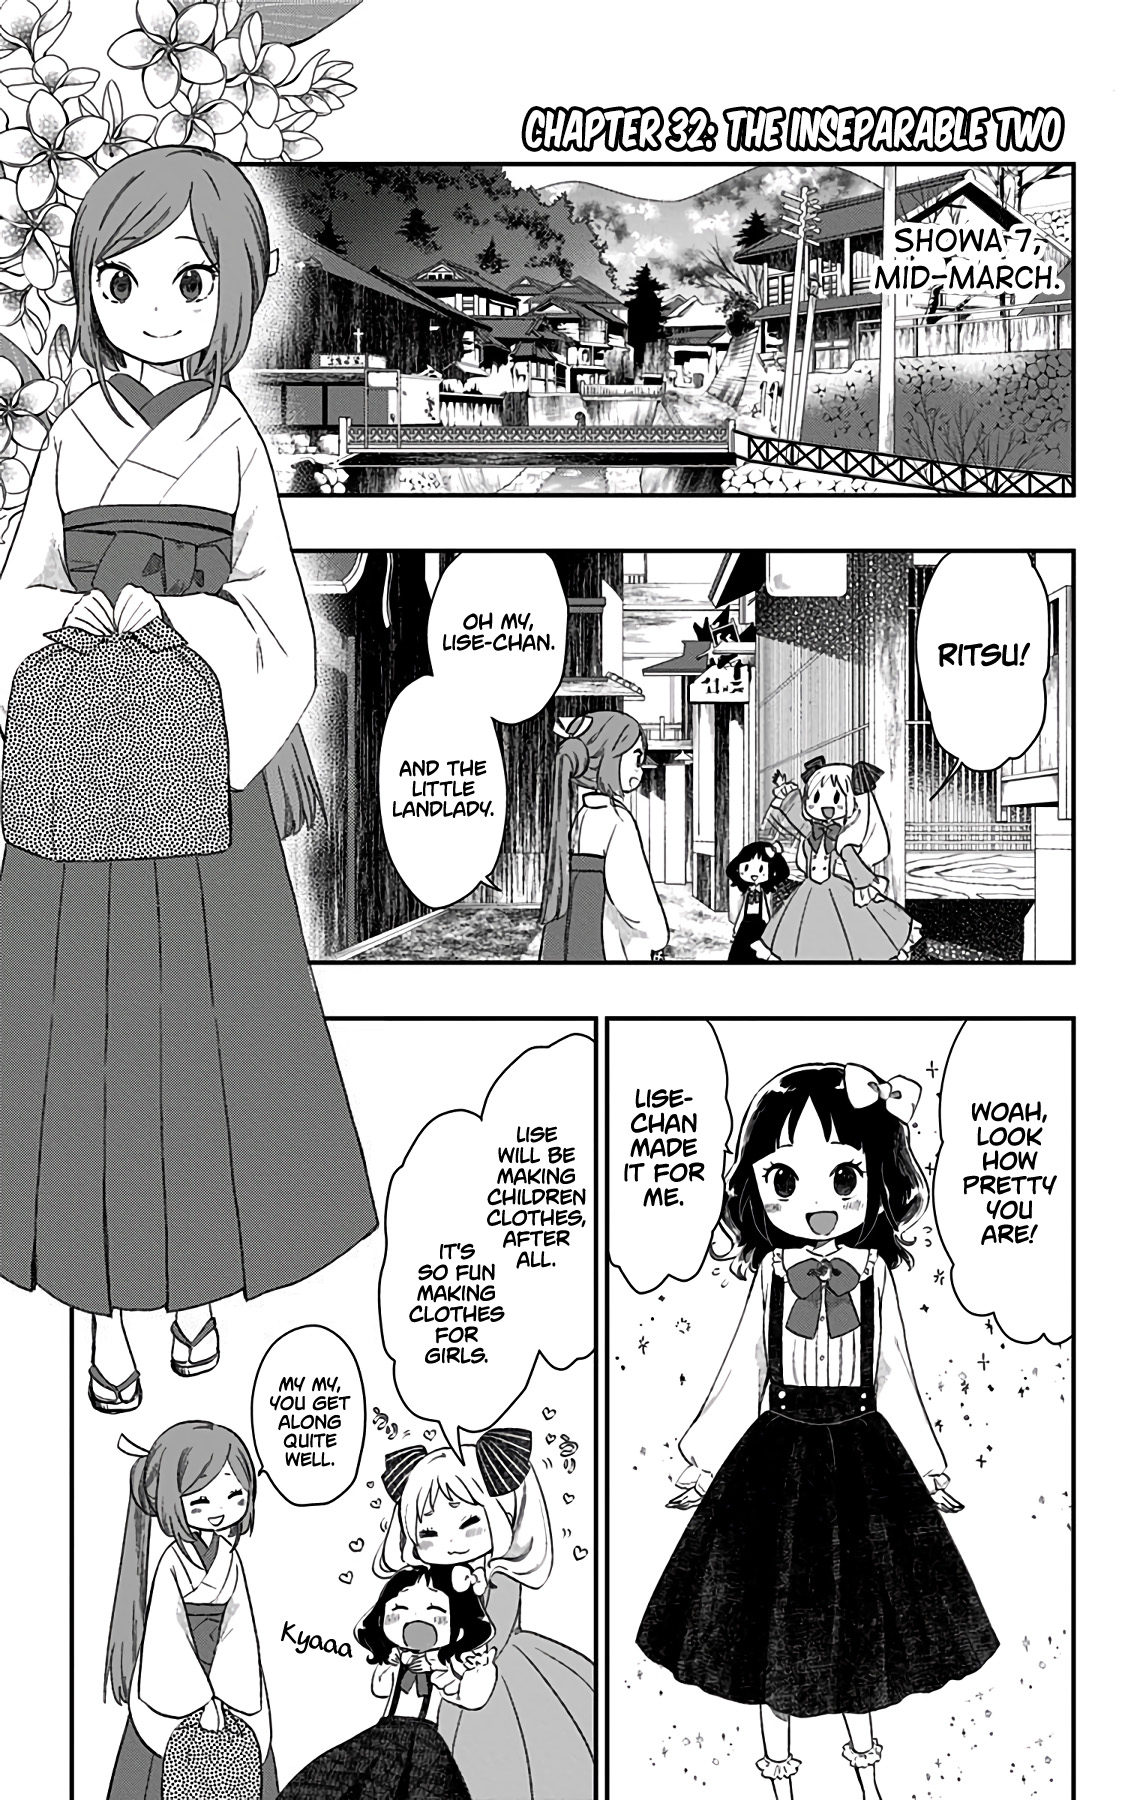 Showa Maiden Fairytale Vol.4 Chapter 32: The Inseparable Two - Picture 1